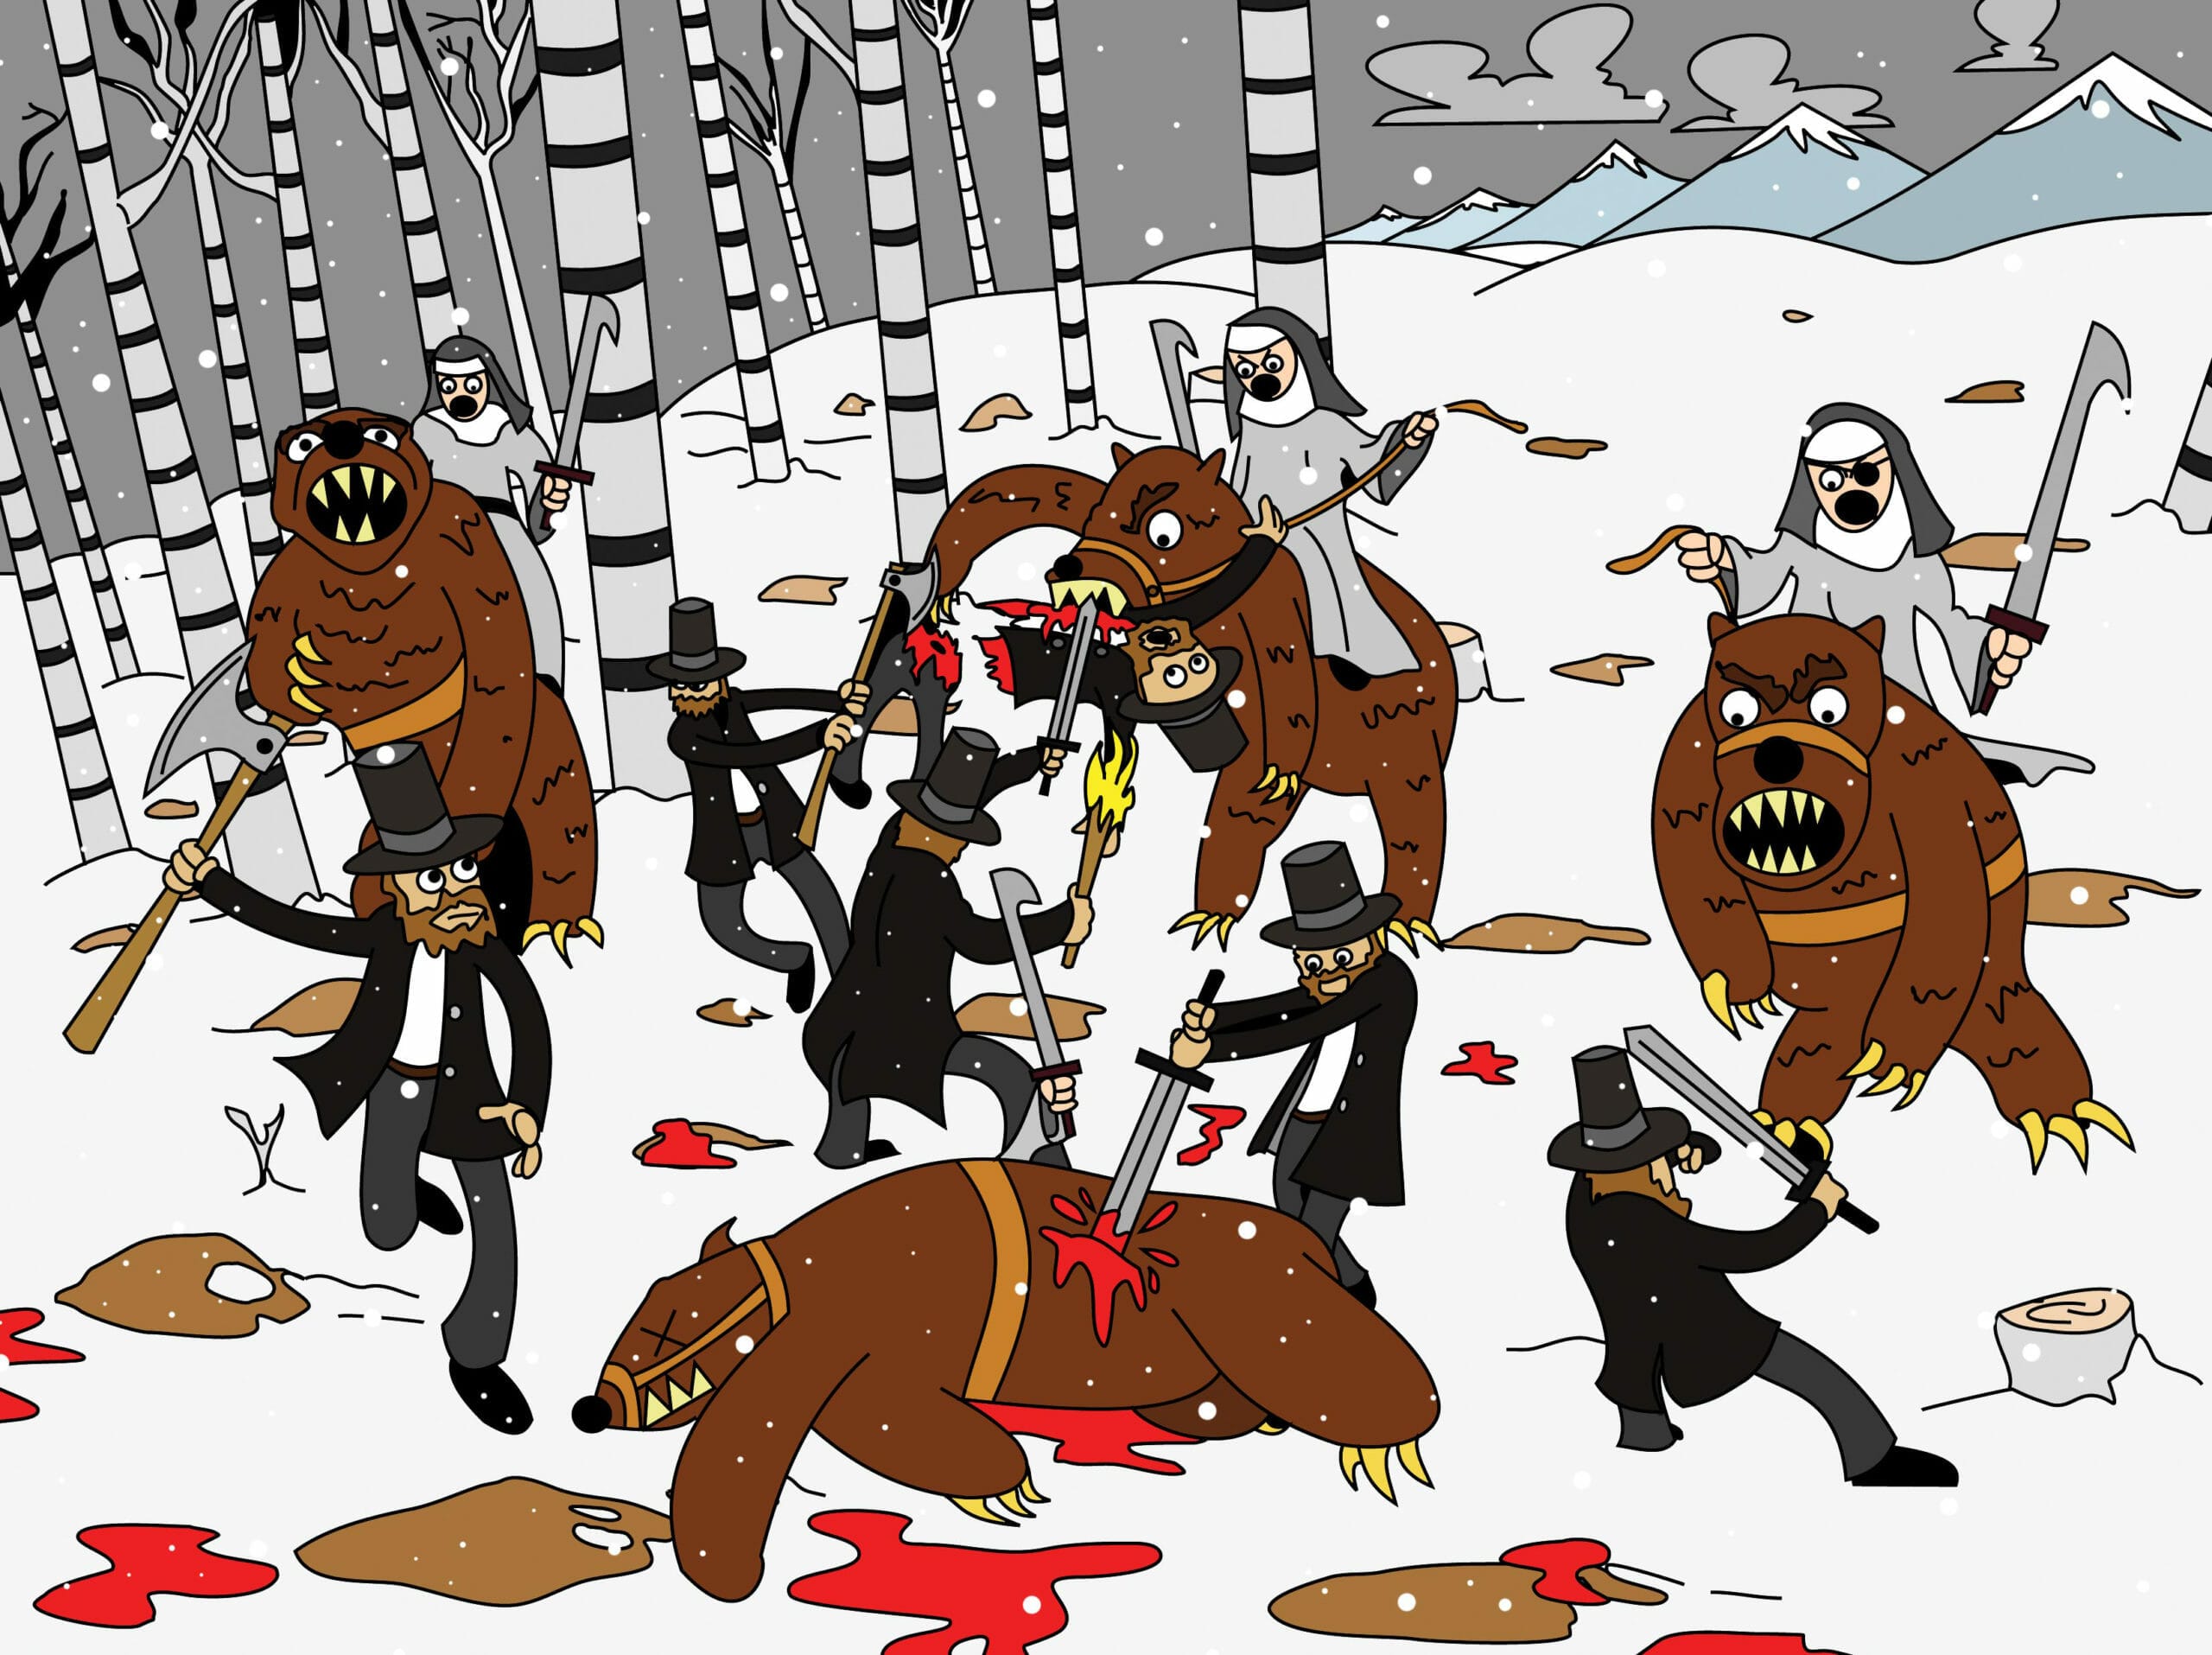 Here we can see warrior nuns riding attack bears in a melee against Lincoln clones armed with axes.